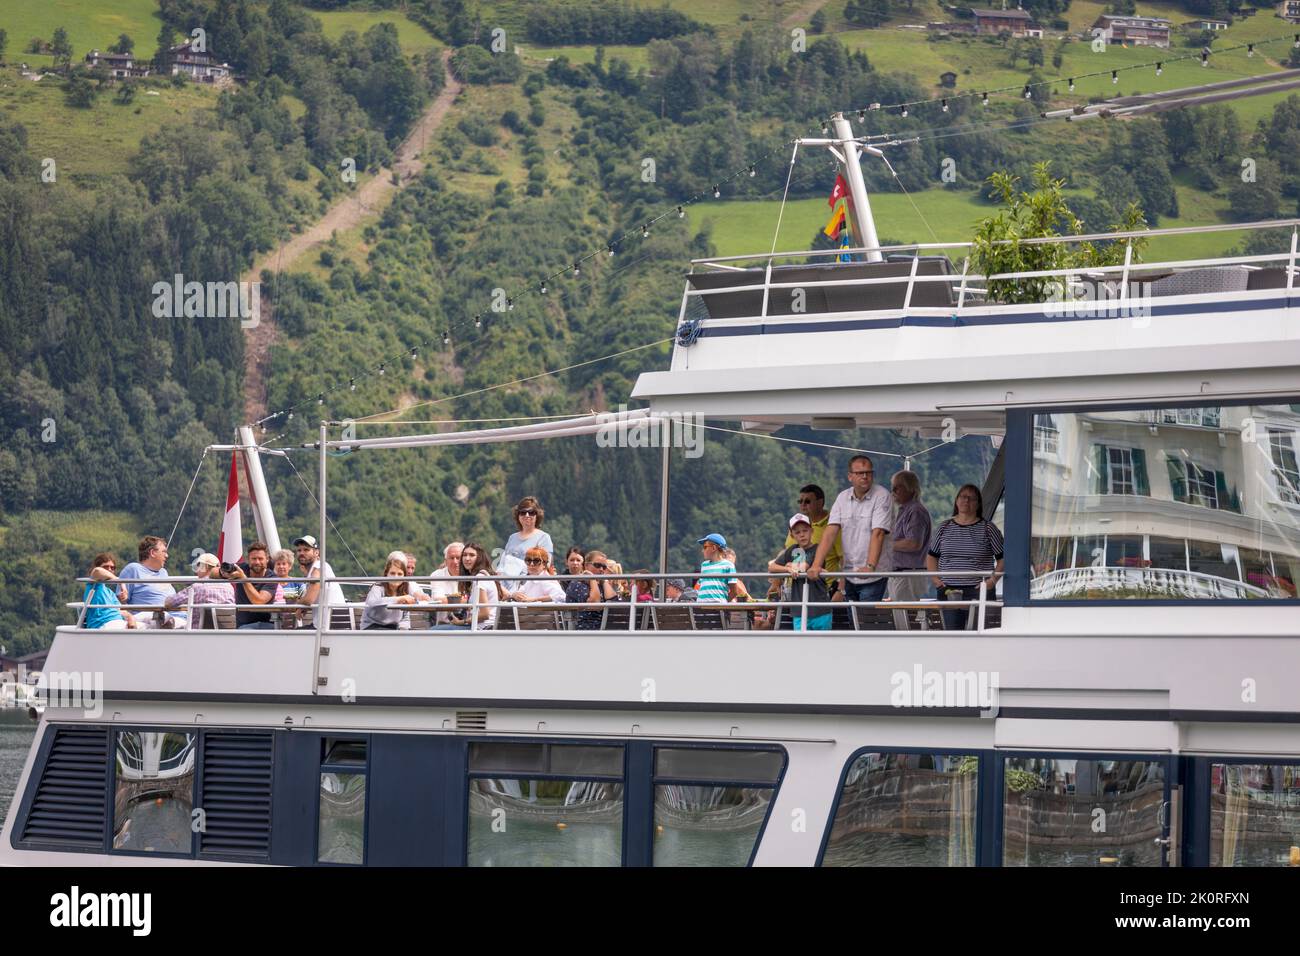 Sightseeing boat with passengers close up, Zell am See, Austria Stock Photo